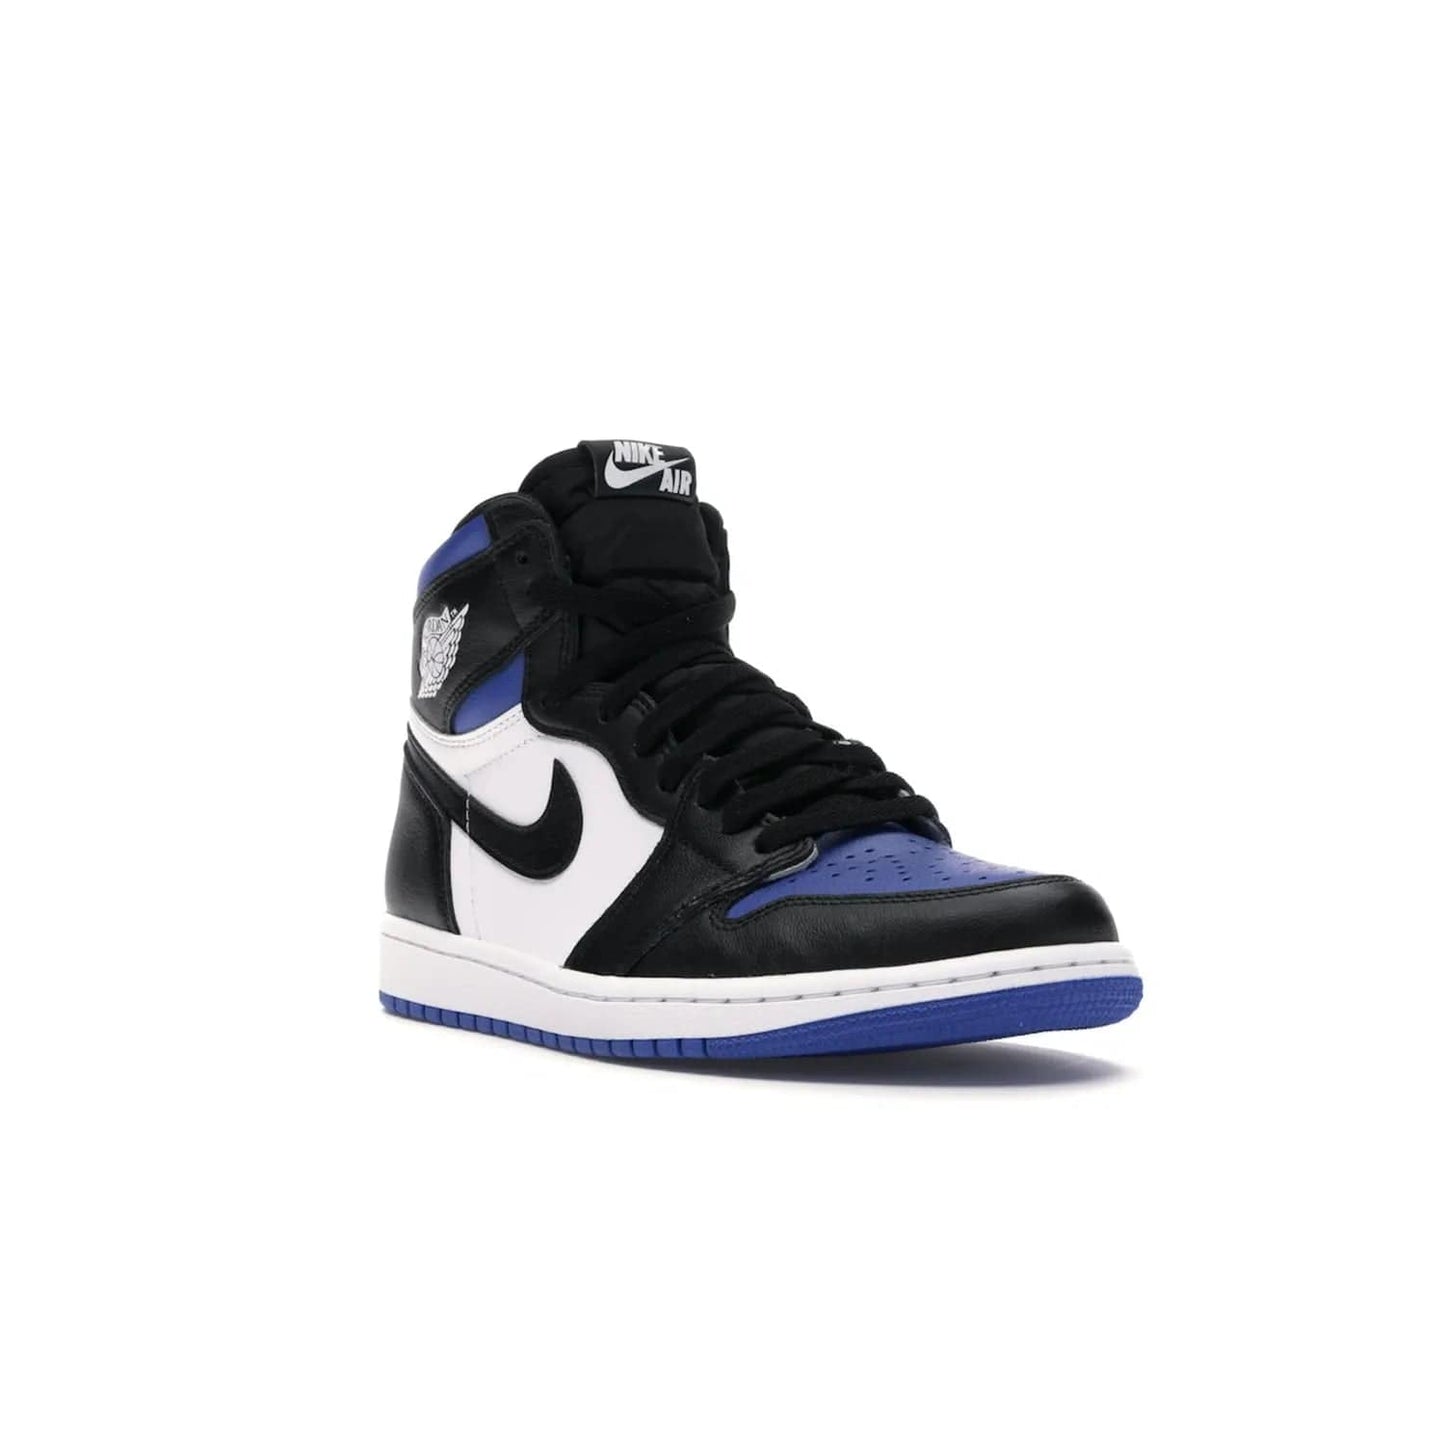 Jordan 1 Retro High Royal Toe - Image 6 - Only at www.BallersClubKickz.com - Refresh your look with the Jordan 1 Retro High Royal Toe. This classic AJ 1 sports a white and royal leather upper, black leather overlays, and branded leather tongue tag. Pick up today and set the streets ablaze.